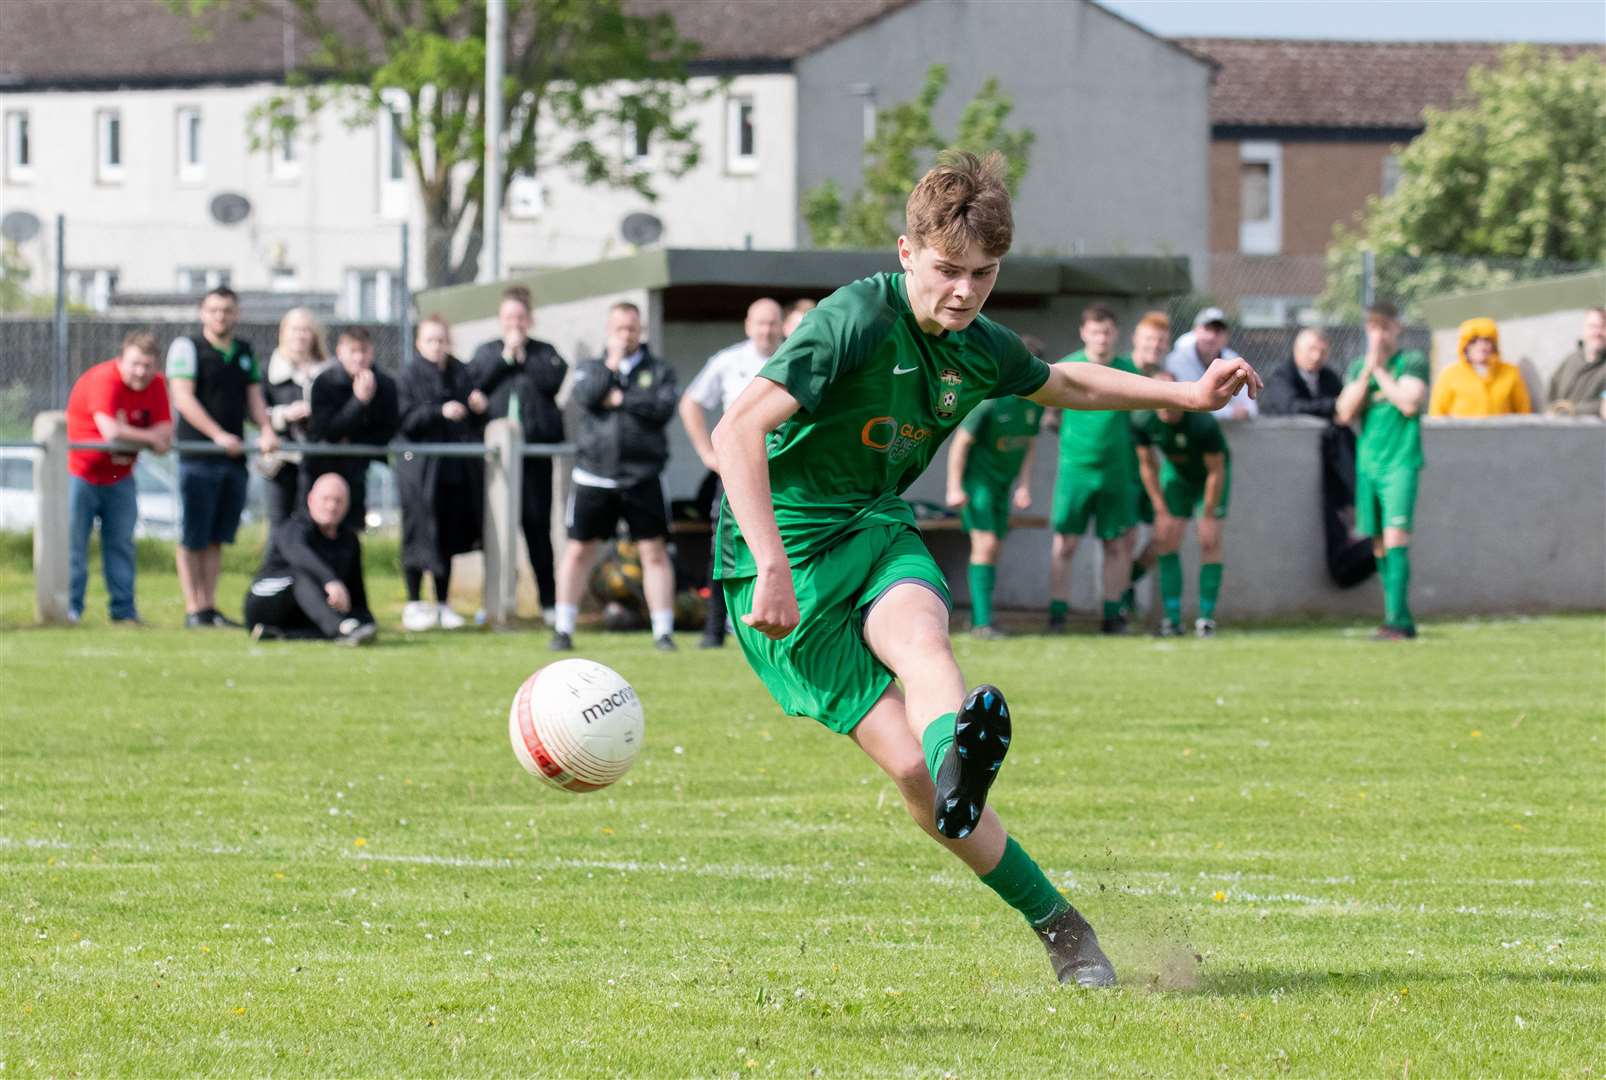 Dufftown's Aiden Cruickshank scores the winning penalty...Dufftown FC (2) vs Forres Thistle FC (2) - Dufftown FC win 5-3 on penalties - Elginshire Cup Final held at Logie Park, Forres 14/05/2022...Picture: Daniel Forsyth..